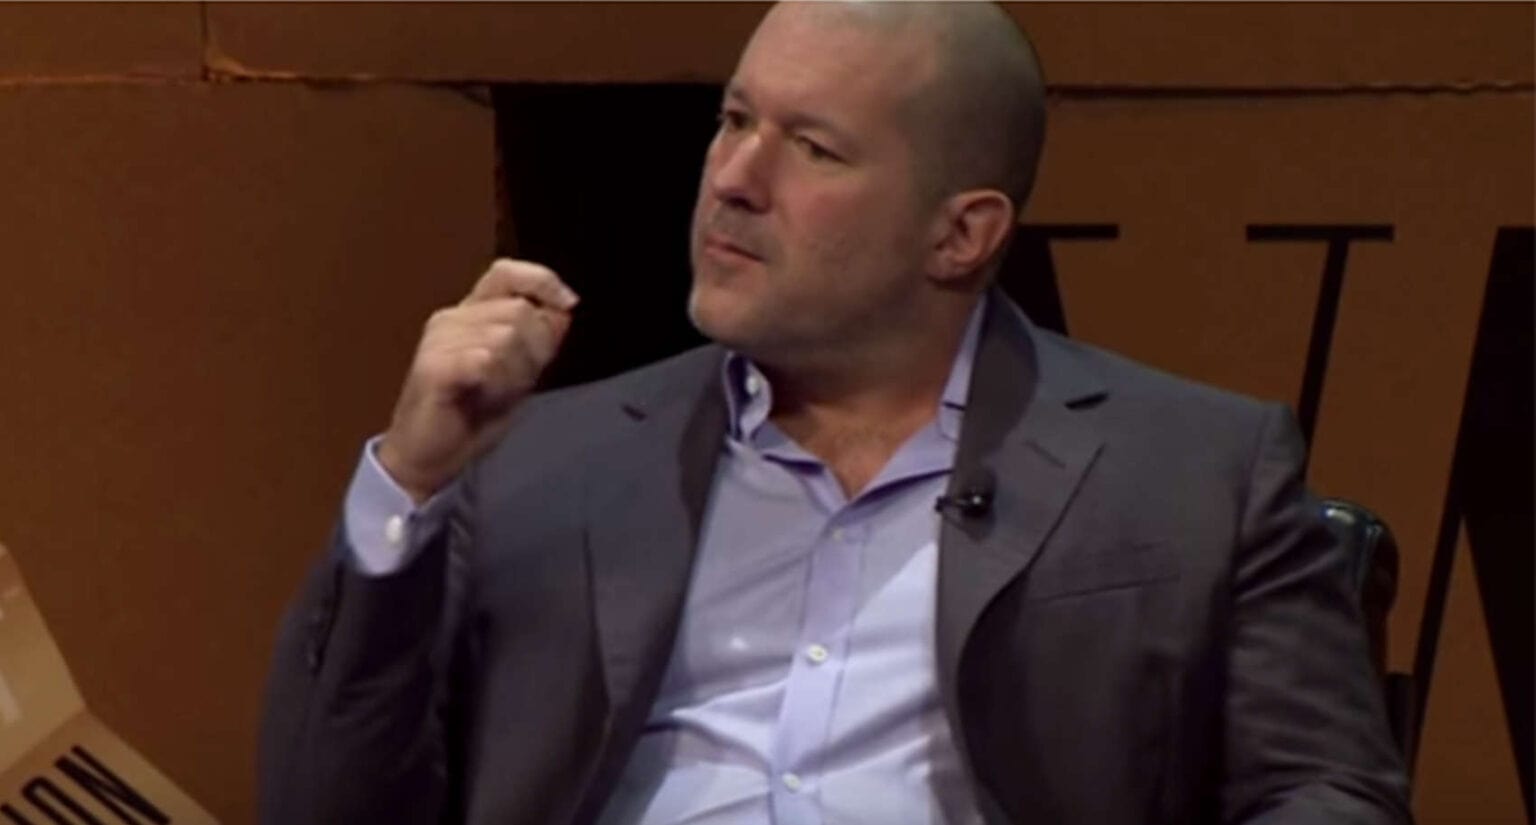 Jony Ive left Apple in 2019 and founded design firm LoveFrom.